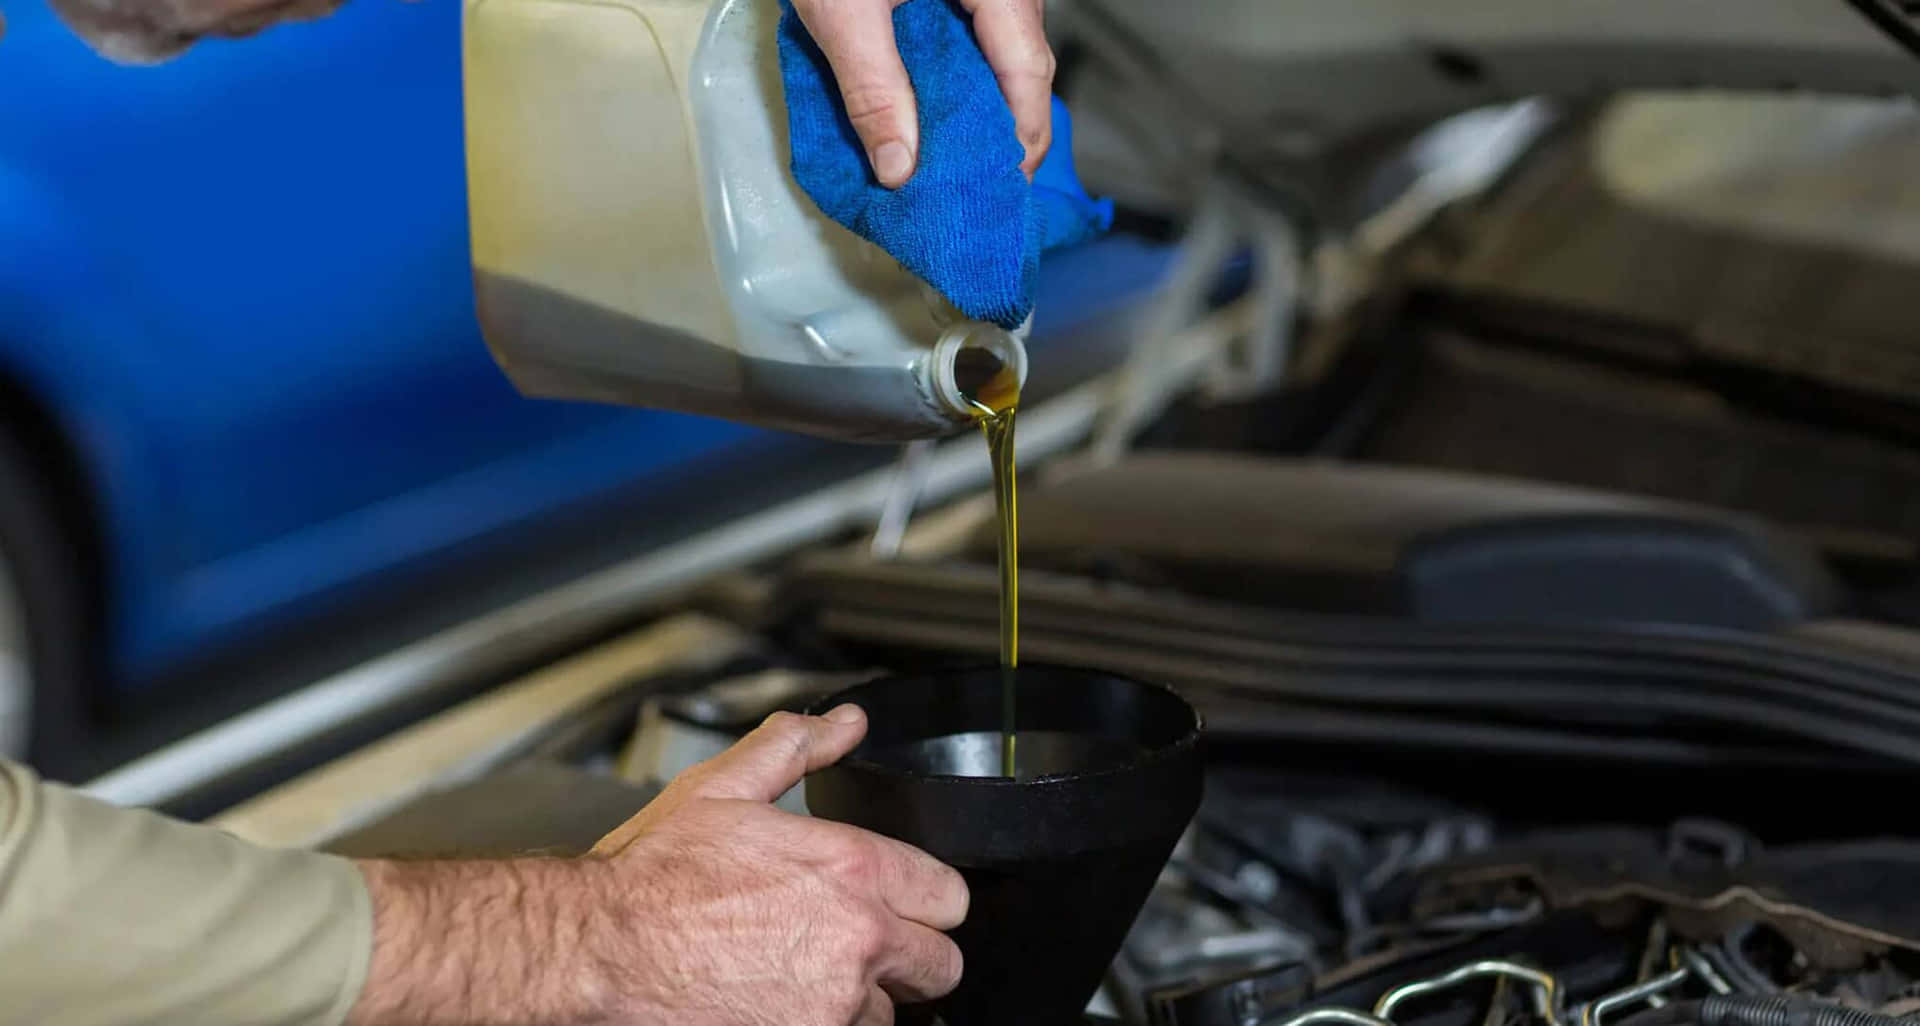 A Man Pouring Oil Into A Car Engine